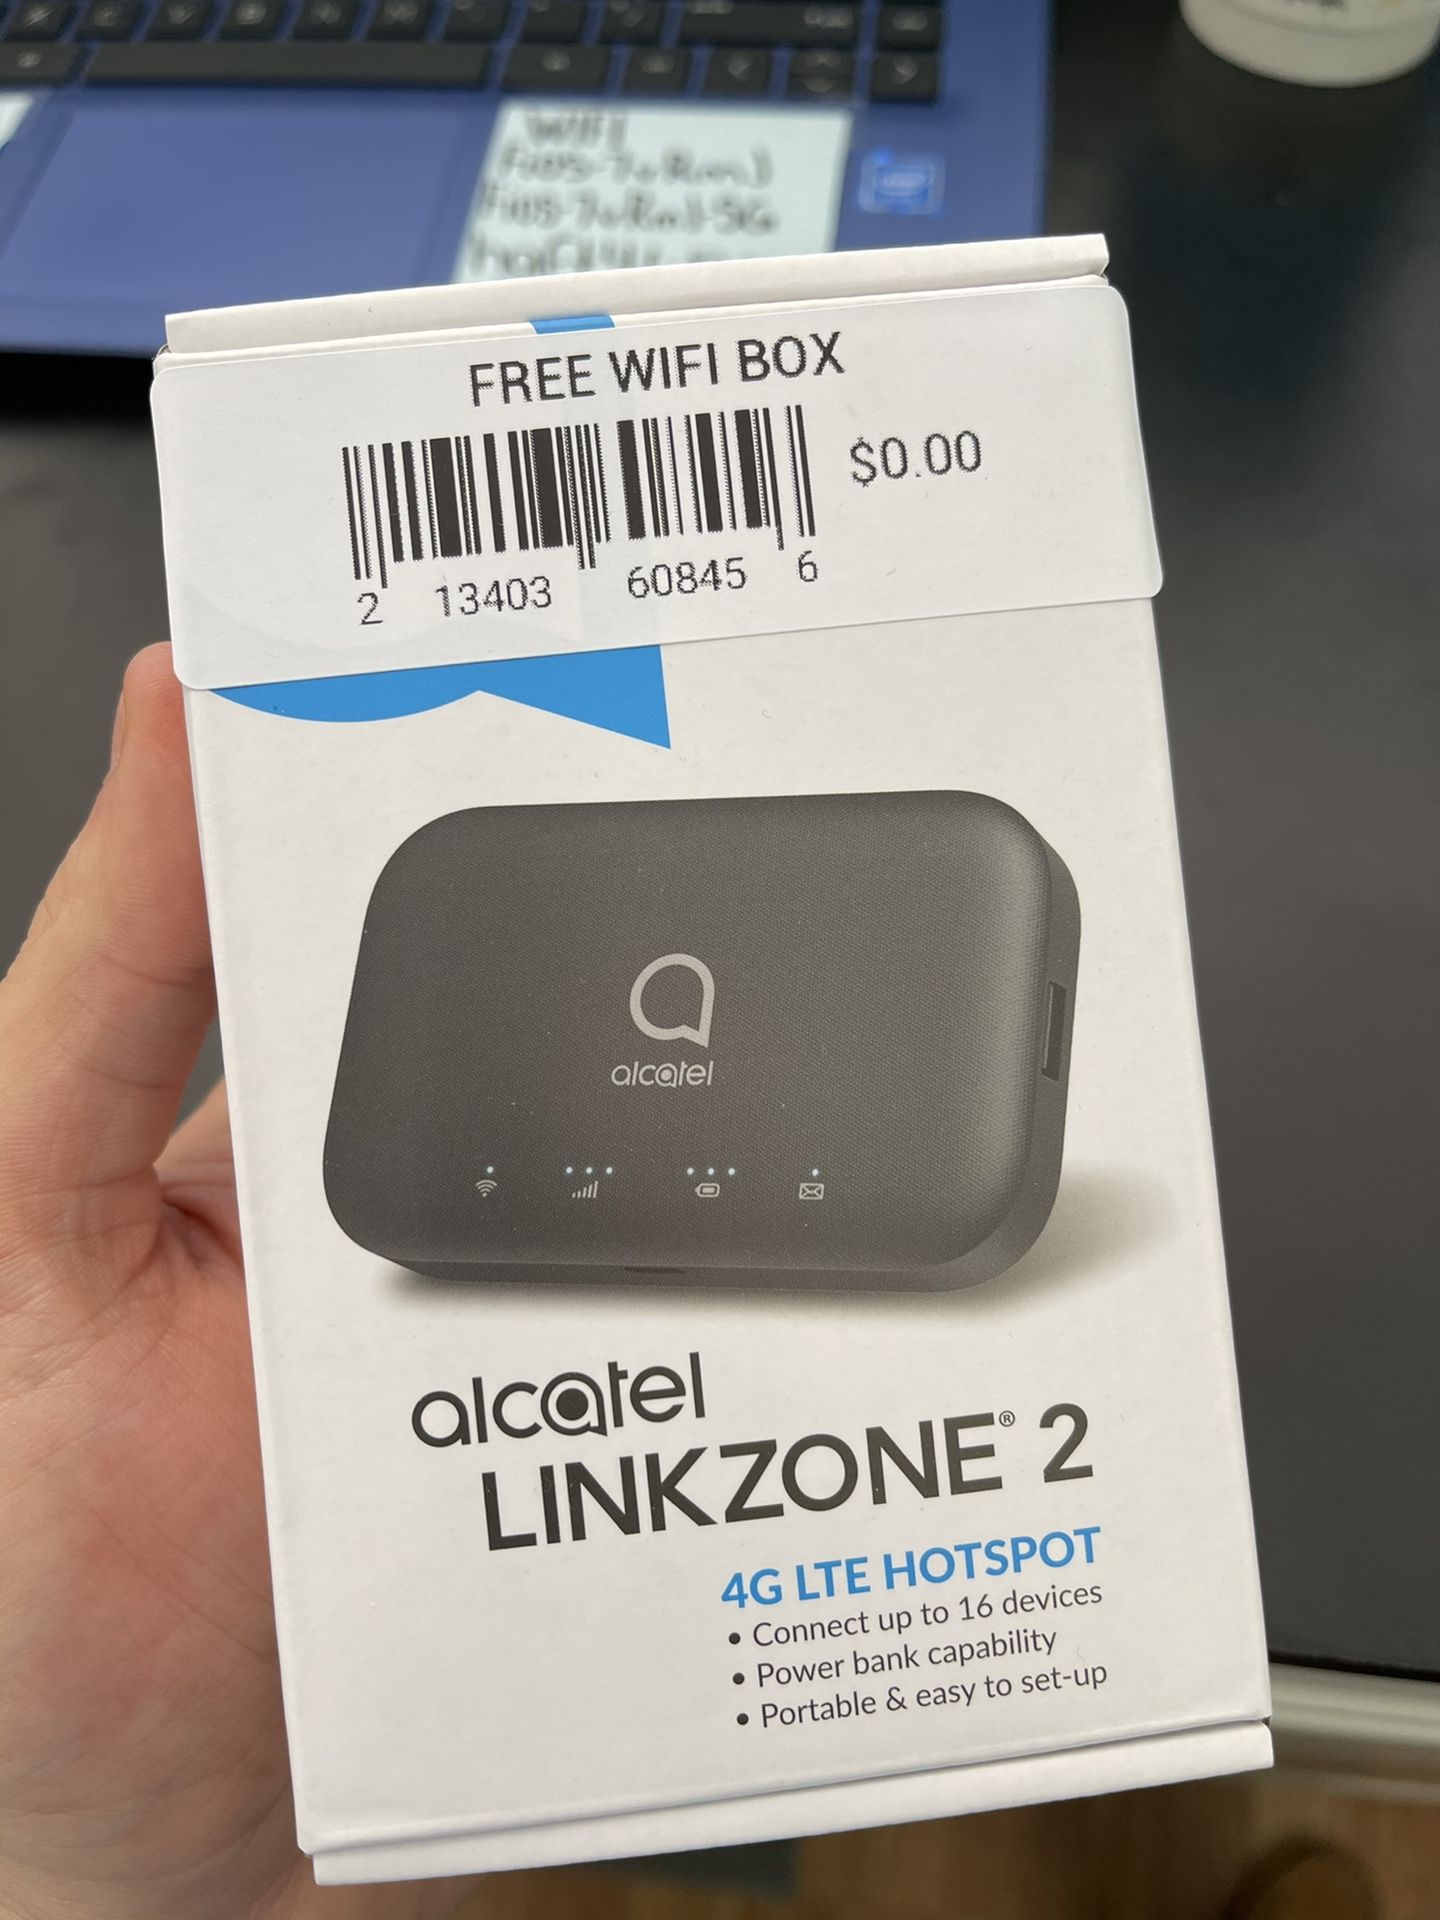 FREE WiFi Box with 6 months of internet - Use With Your iPhone